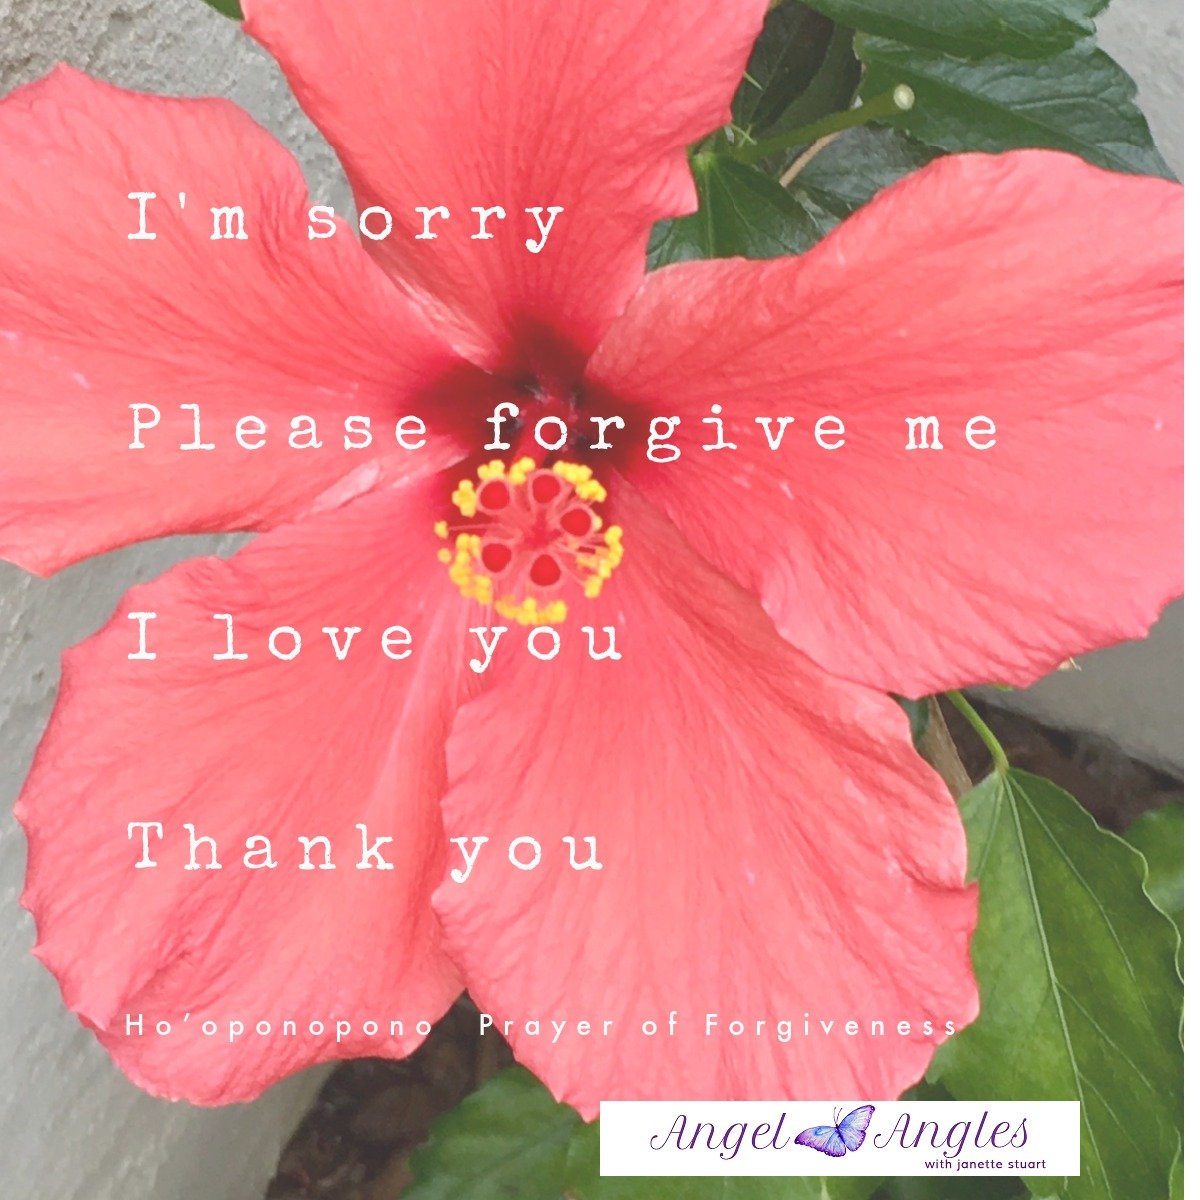 Ho'oponopono - Ancient Hawaiian Prayer of Forgiveness - a beautiful prayer to share with yourself or another. &lt;3 

I'm sorry
Please forgive me
I love you
Thank you 

Blessings of love, joy, and peace.
Love,
Janette 
.
.
#hooponopono #forgiveness #